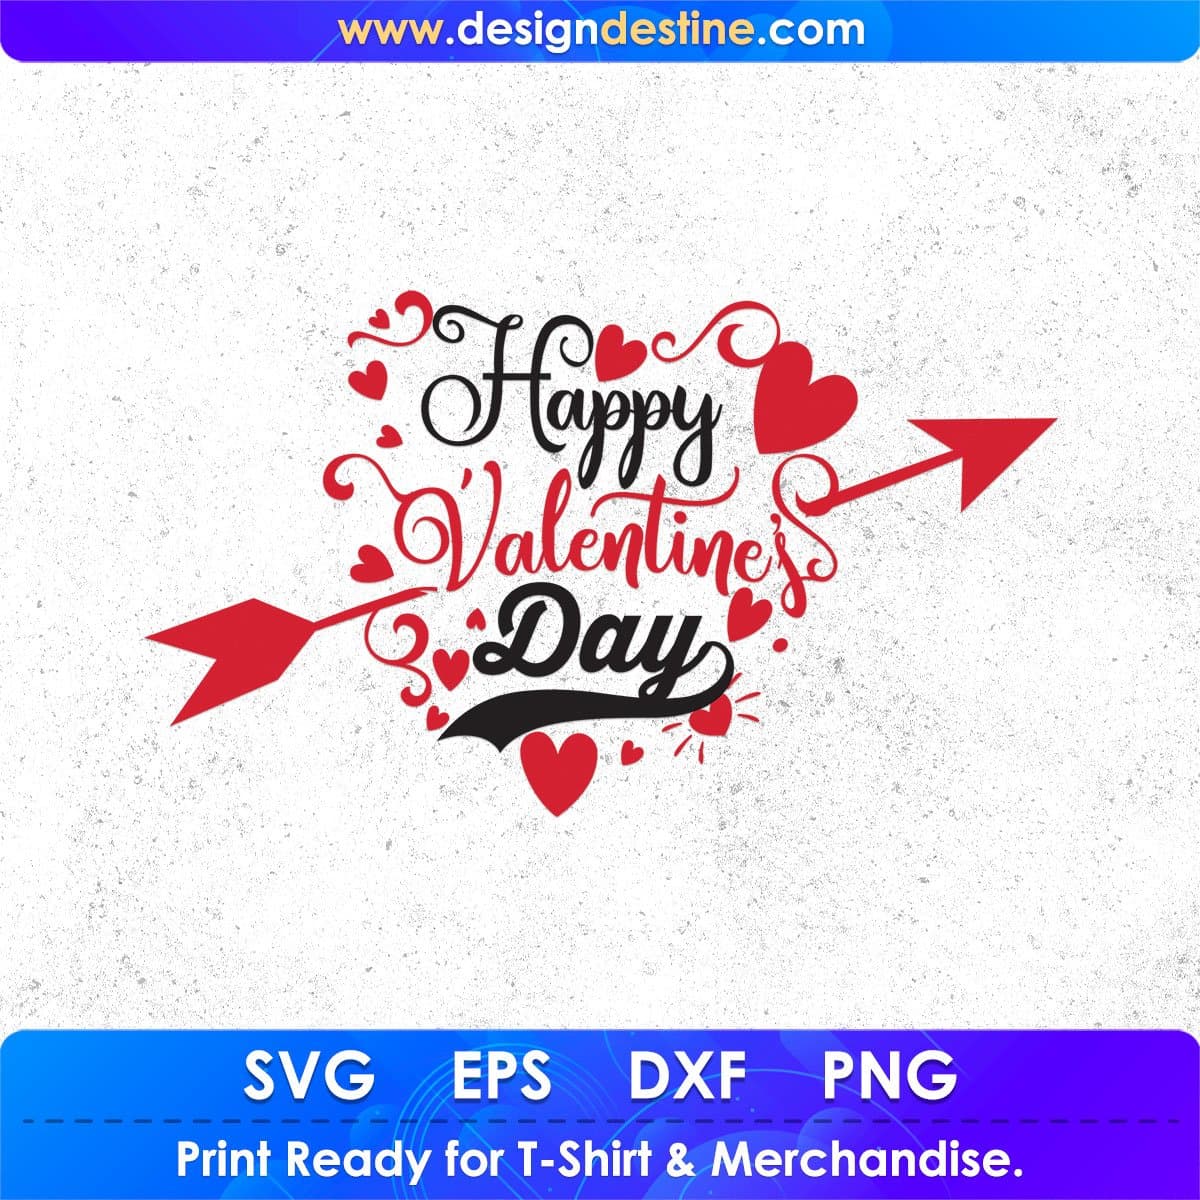 Happy Valentines Day Images  Free Photos, PNG Stickers